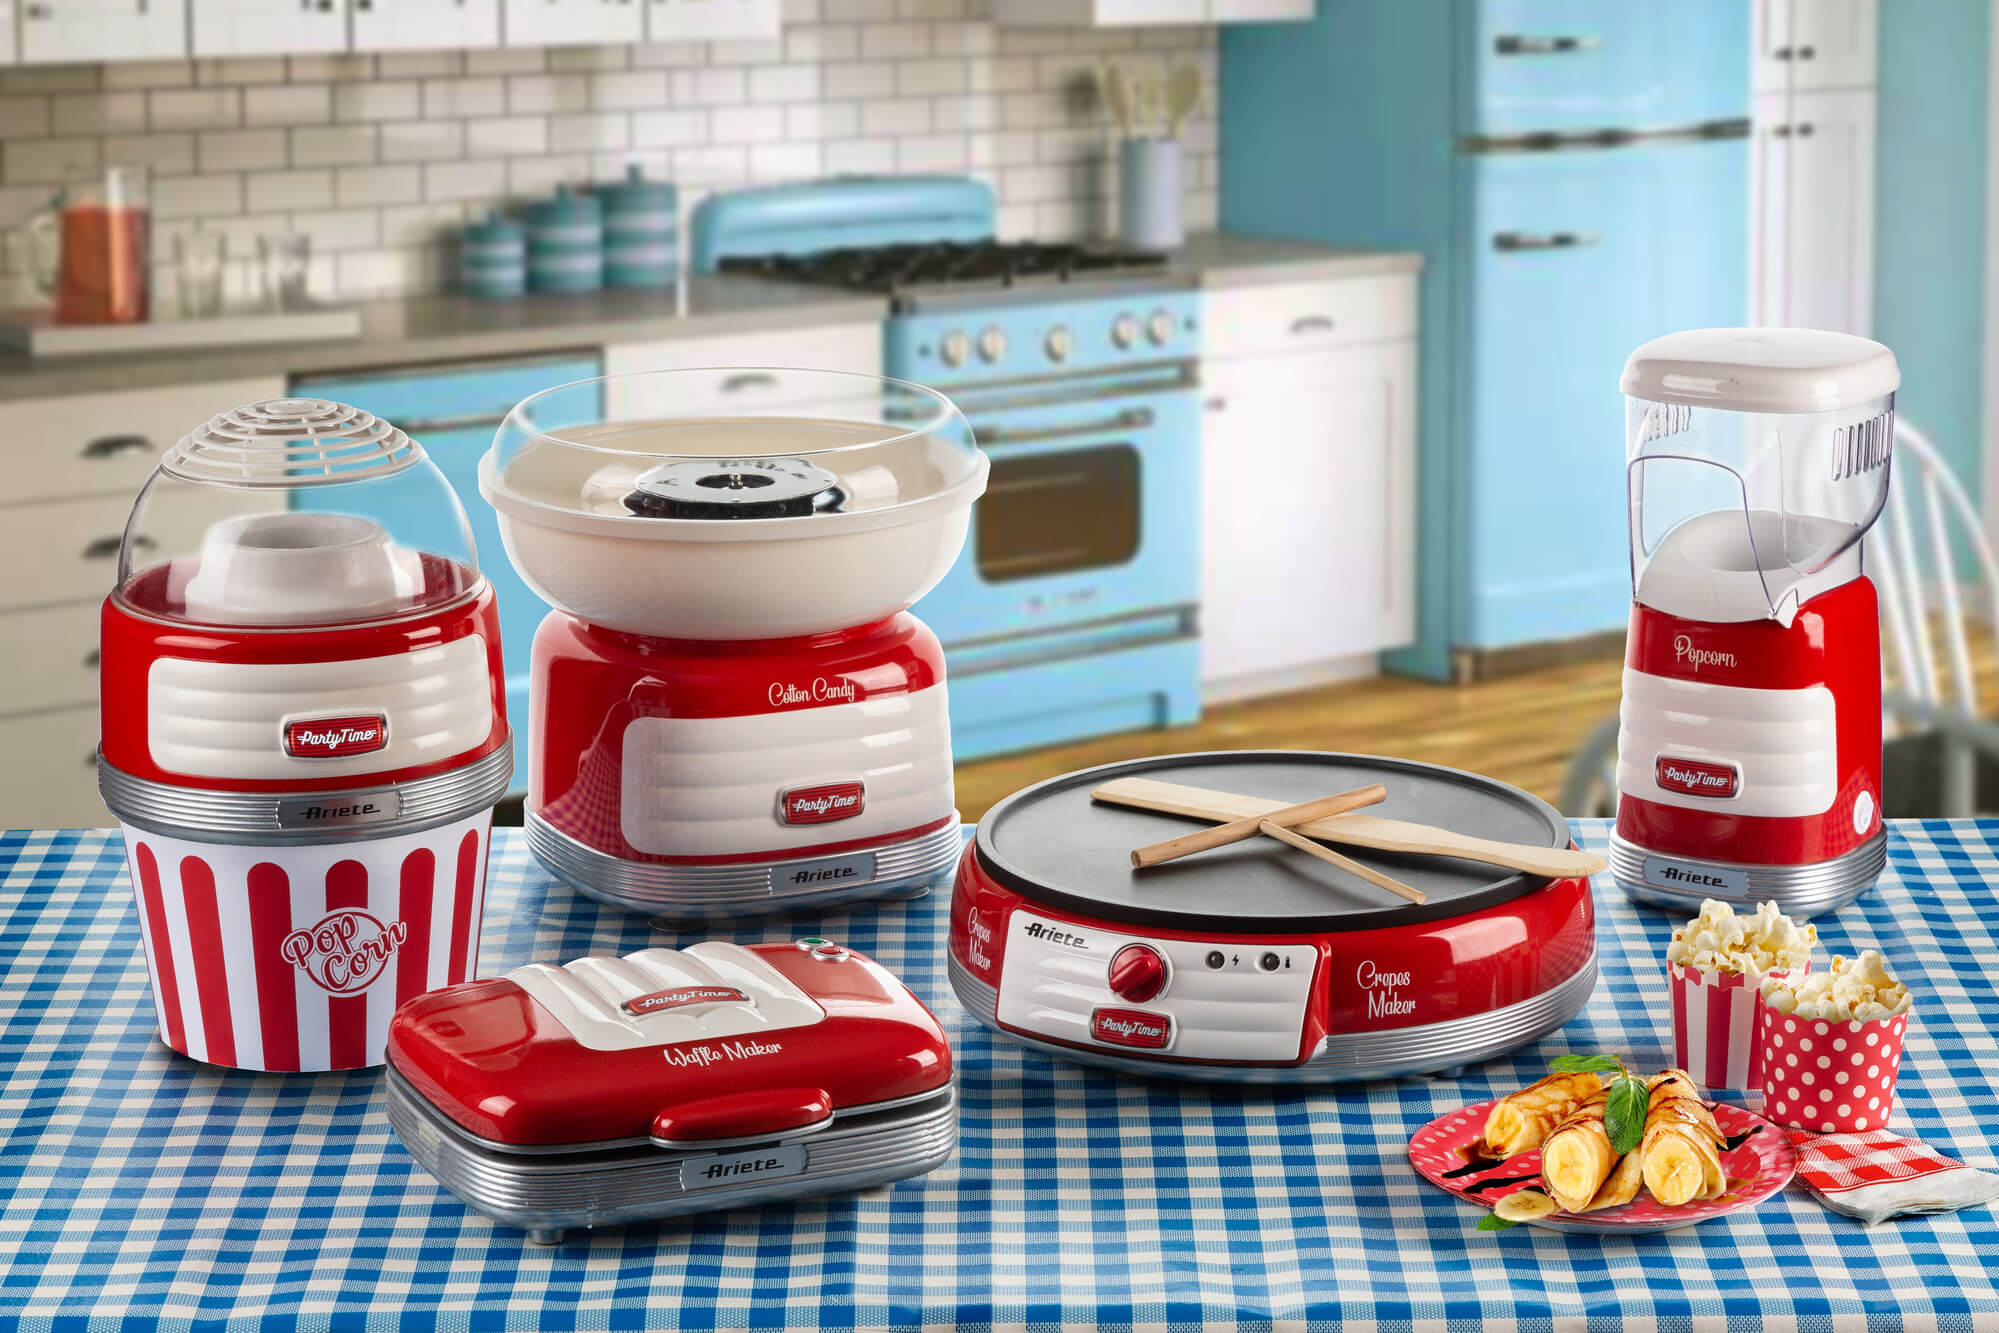 https://www.ariete.store/media/images/product/herocontent/166/linea-party-time-ariete-rosso-c9901b6fb4c2f927f8fb819a9f1643b8.jpg